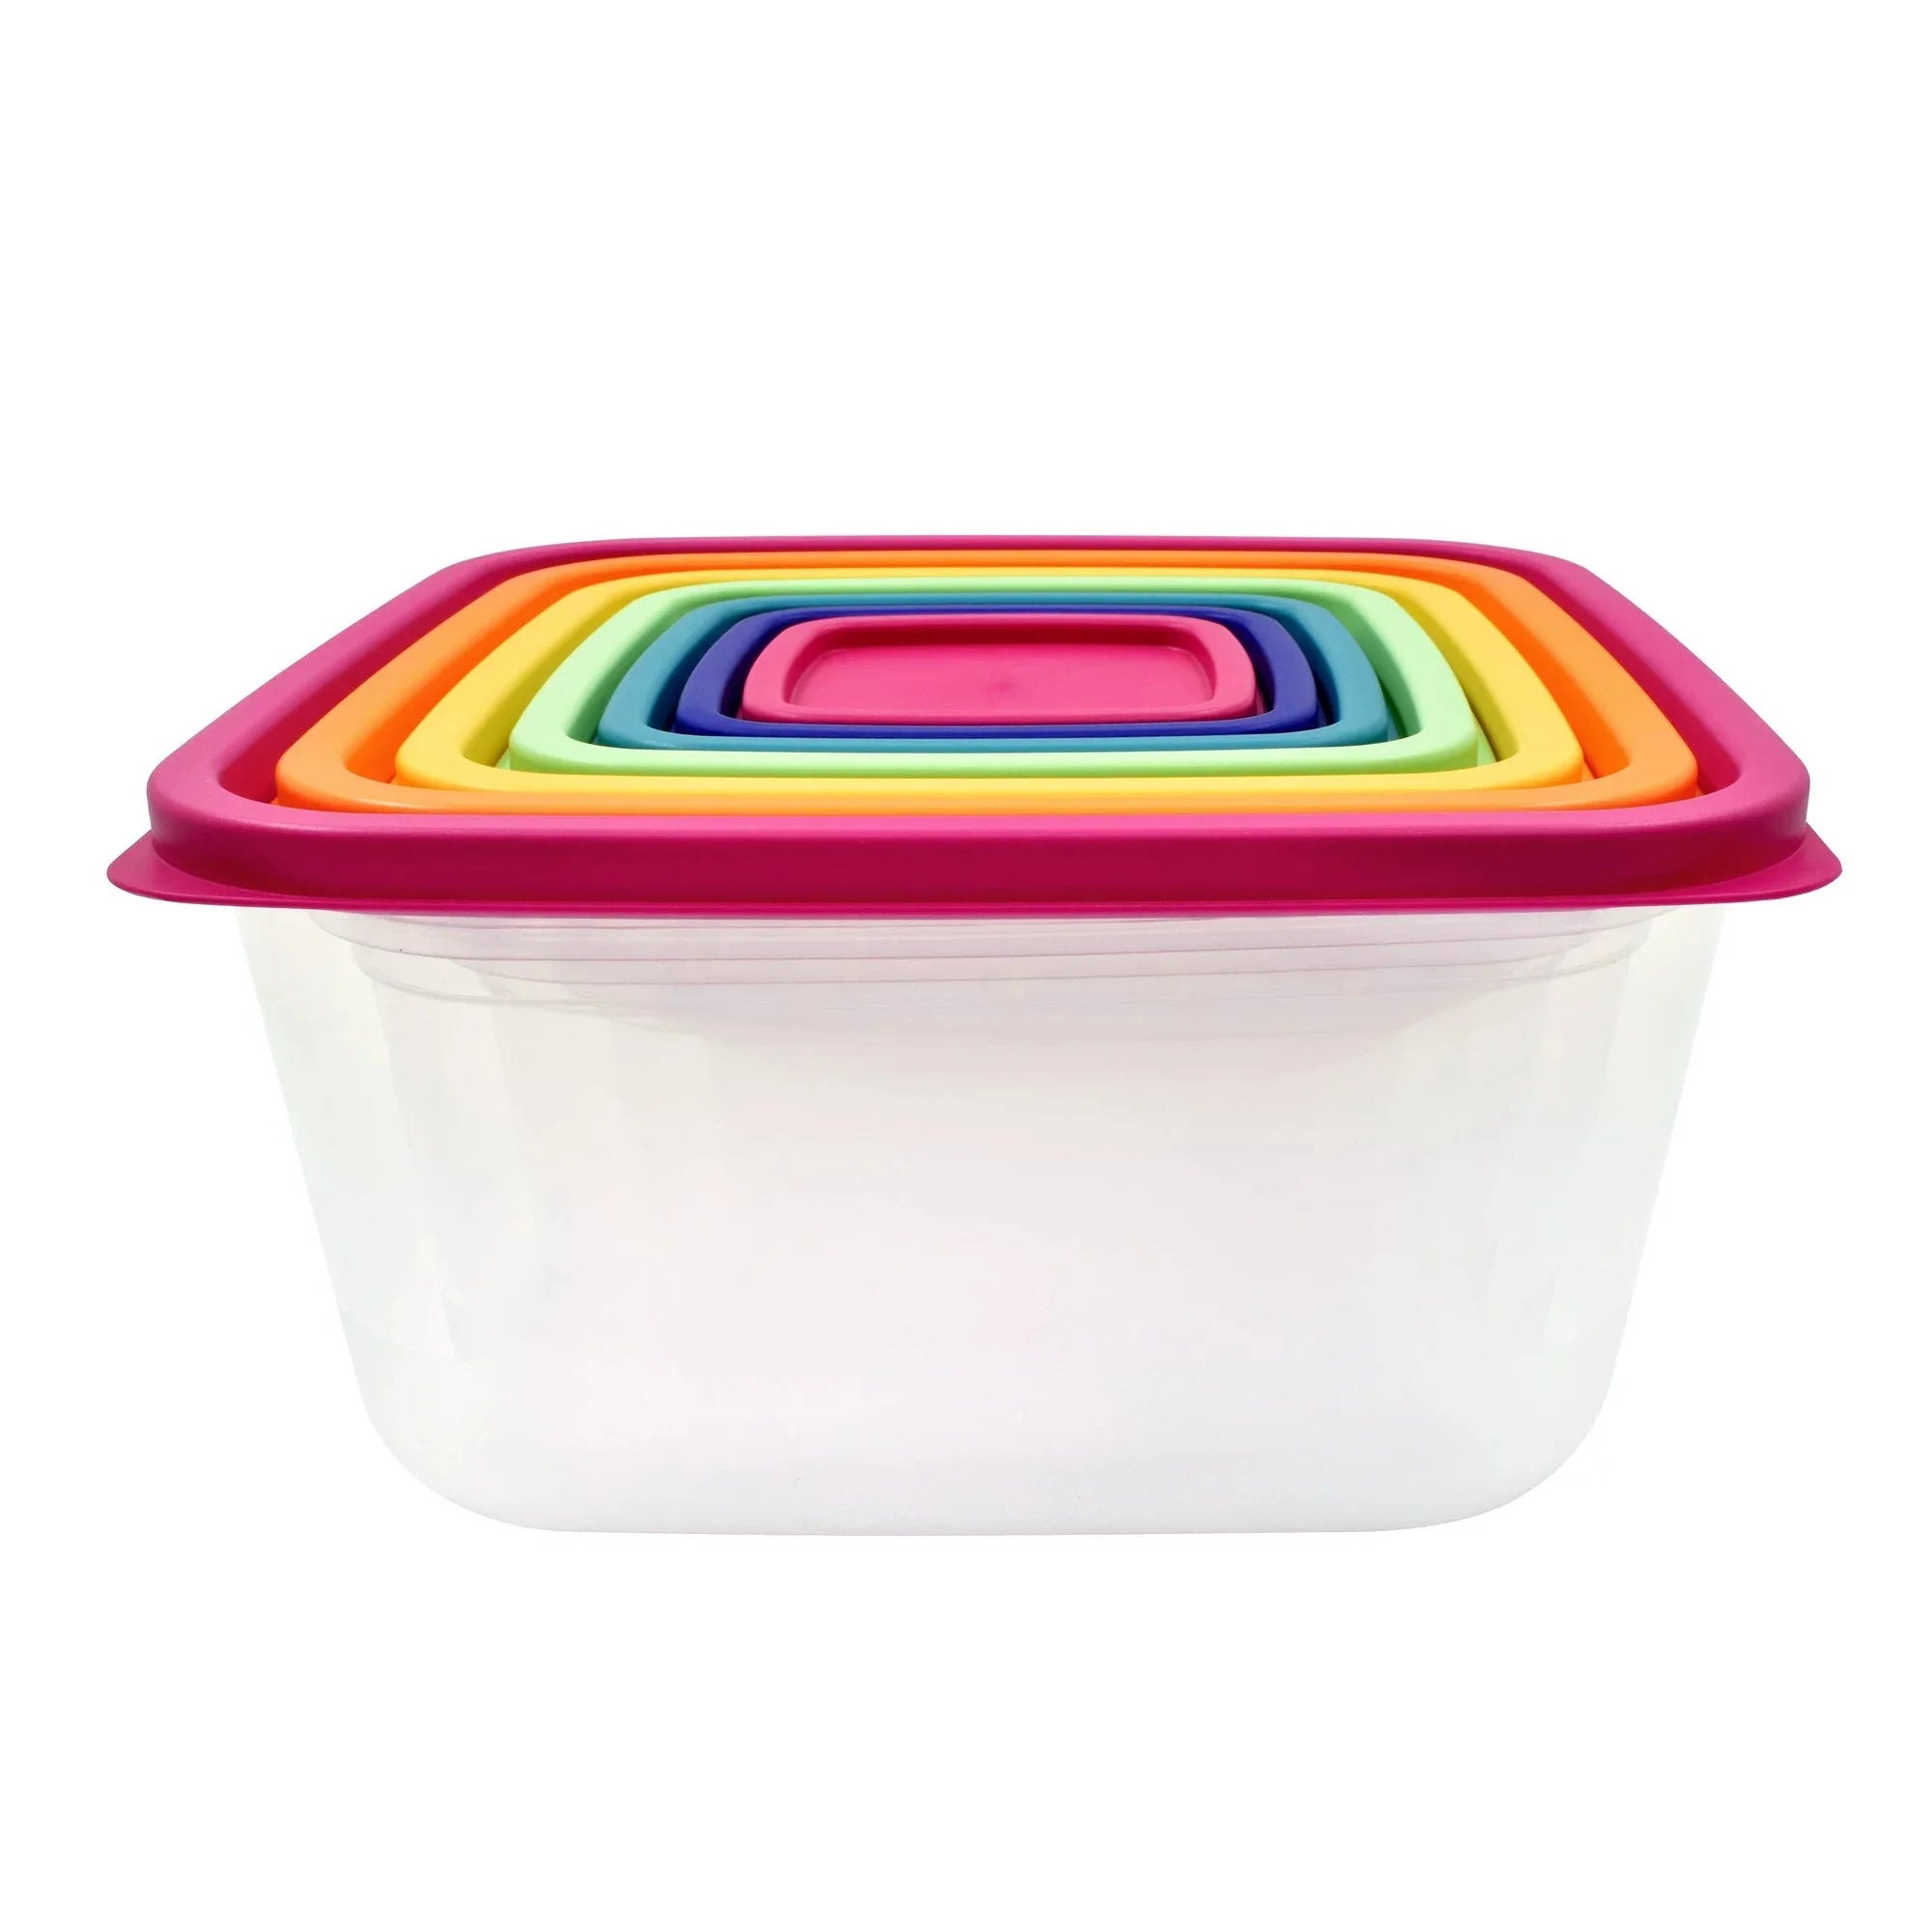 Wholesale prices with free shipping all over United States Mainstays Plastic Rainbow Food Storage Set, Multi Color, 14 Count - Steven Deals